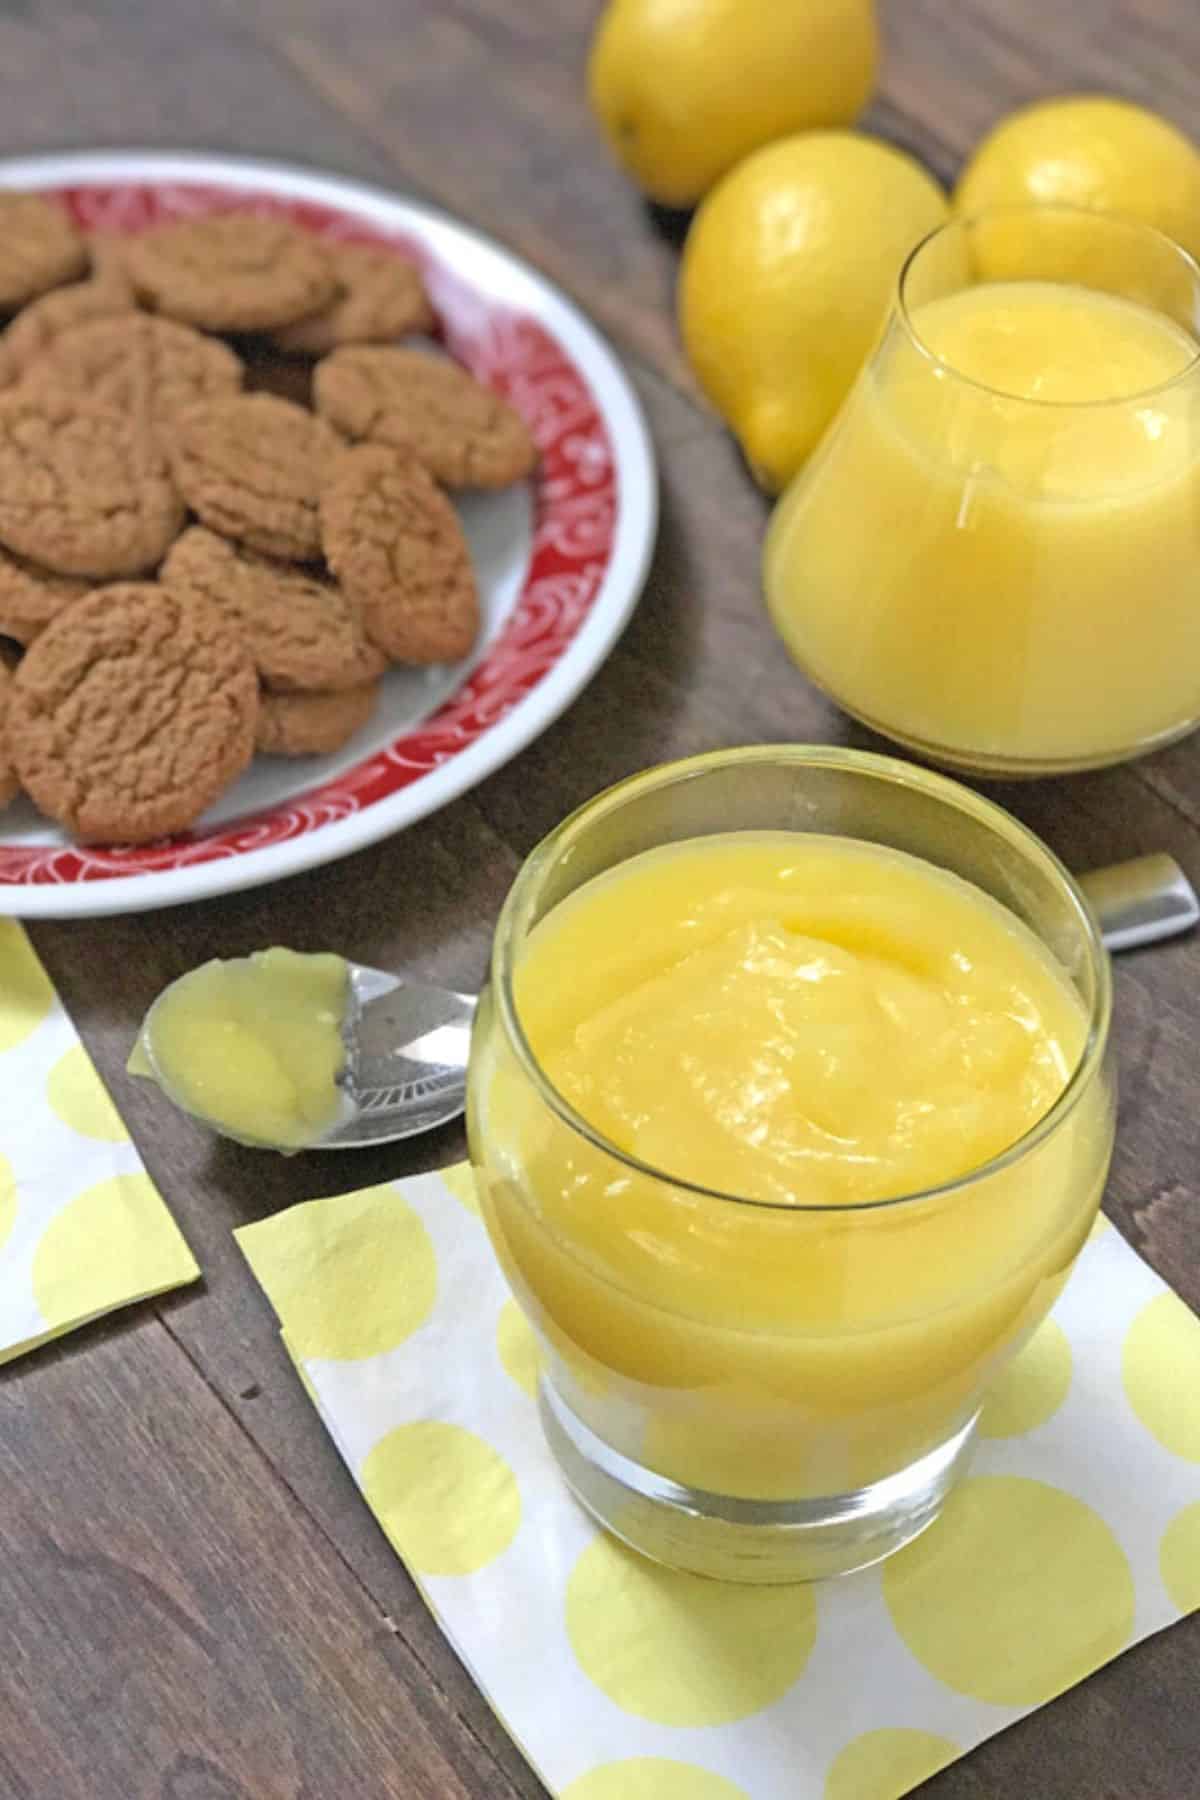 Two jars of lemon curd with lemon and cookies on a wooden table.